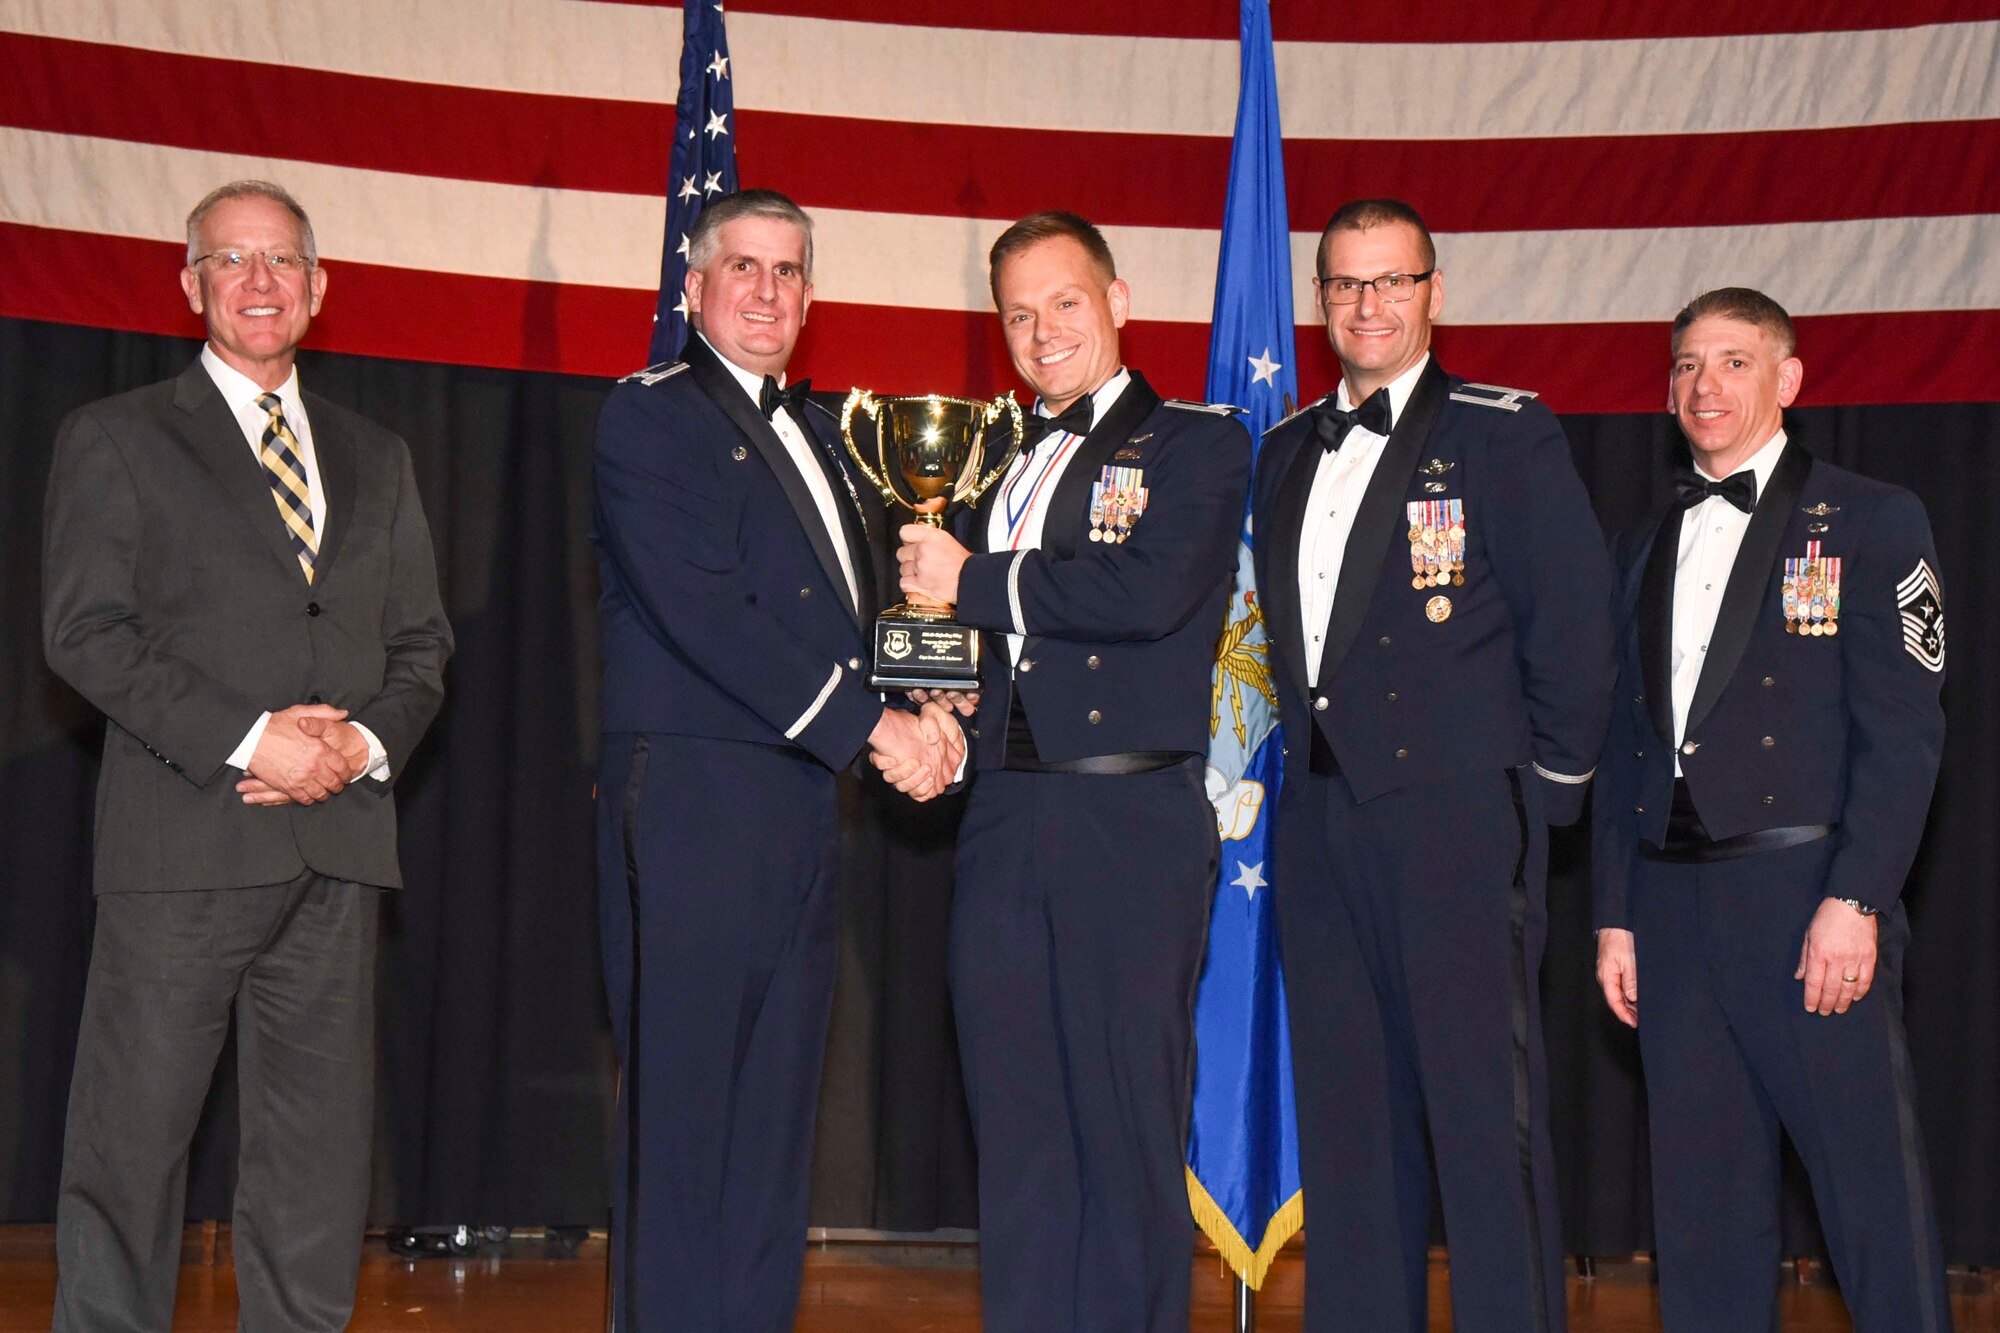 Capt. Bradlee N. Seehawer, center, accepts the 2016 Company Grade Officer of the Year award, Feb. 3, 2017, at McConnell Air Force Base, Kan. The annual awards ceremony recognized military and civilian members who excel in their areas of responsibilities, leadership qualities, community involvement, self-improvement and innovation from January to December 2016. (U.S. Air Force photo/Senior Airman Christopher Thornbury)